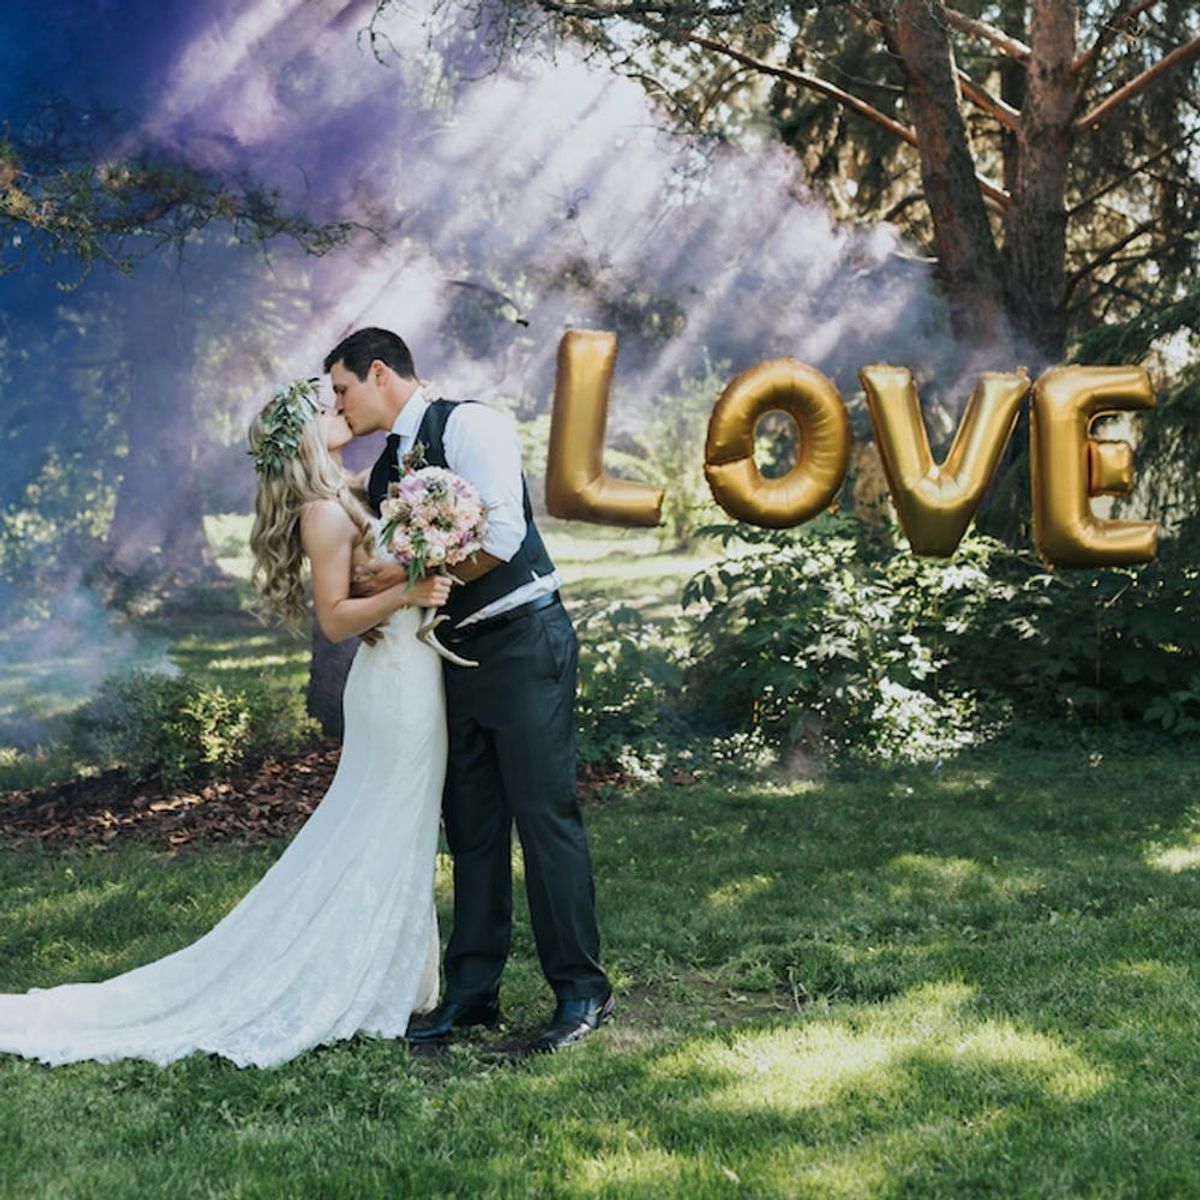 This Couple’s Woodland Wedding Is a Down-to-Earth Dream